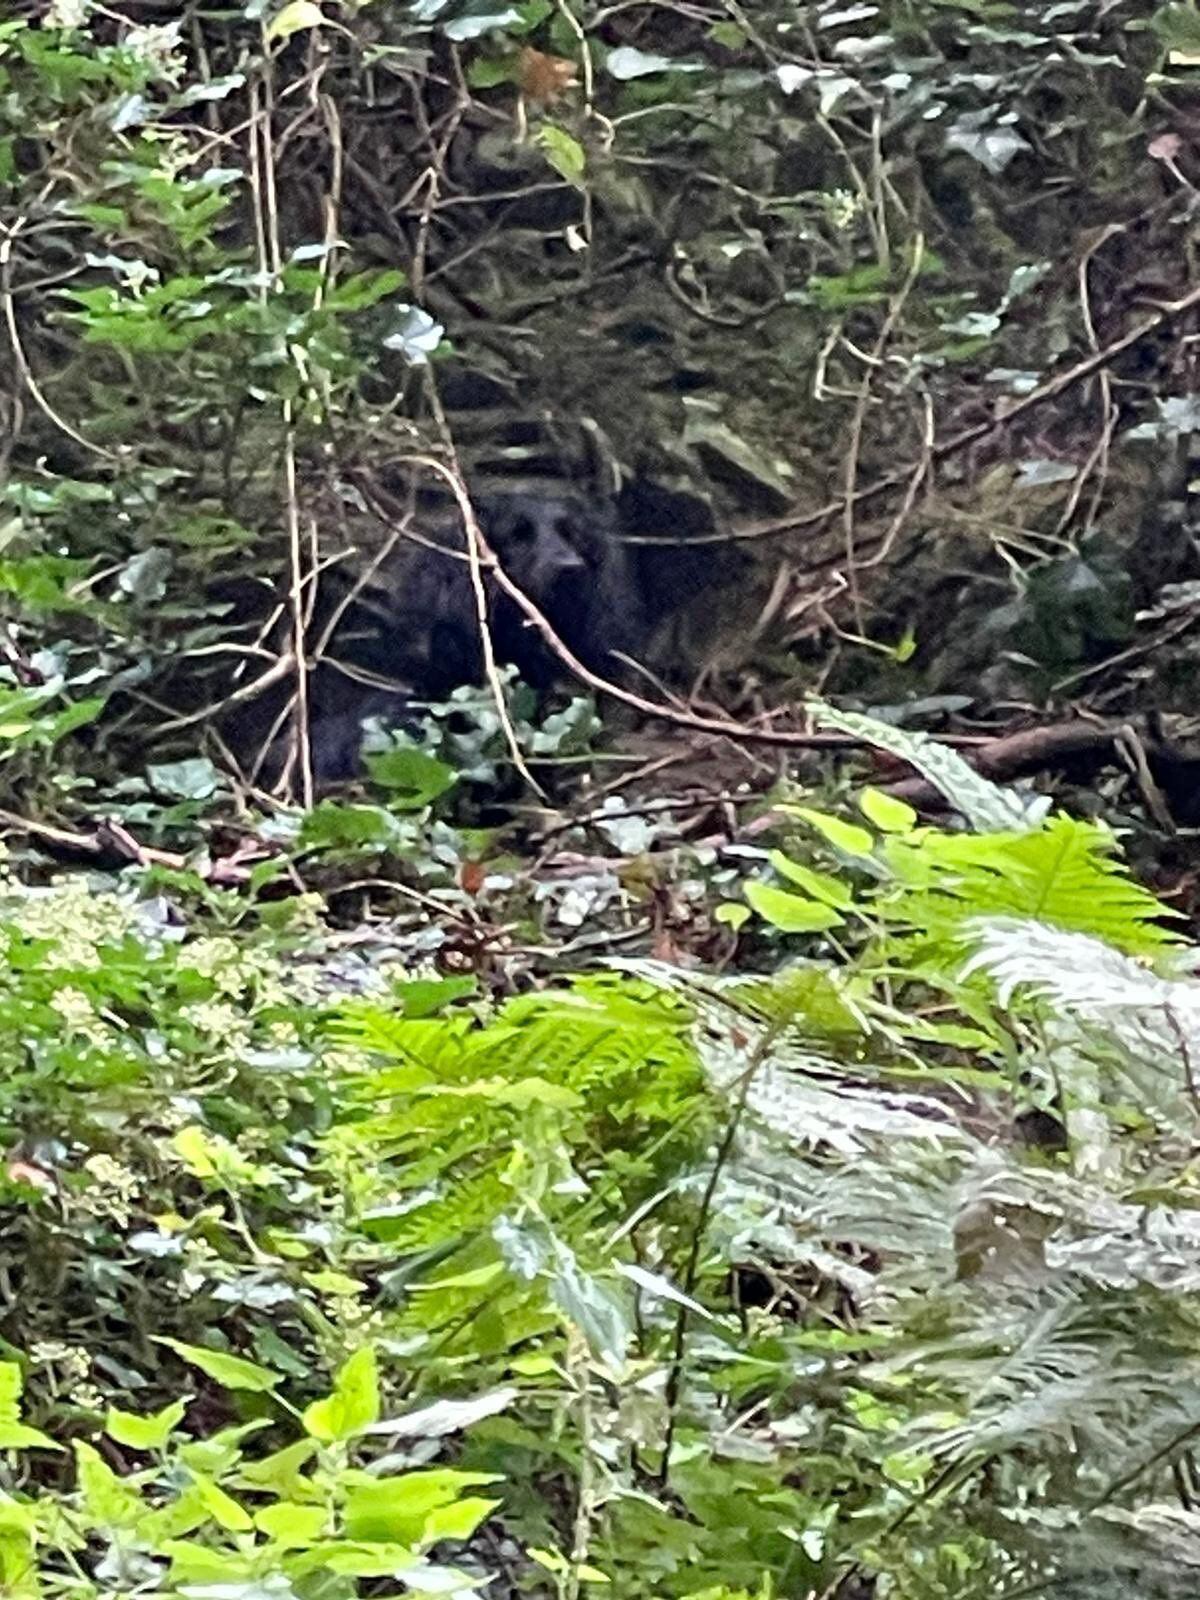 Trixie can just be seen peering out from the undergrowth. Photo: Shropshire Fire and Rescue Service.